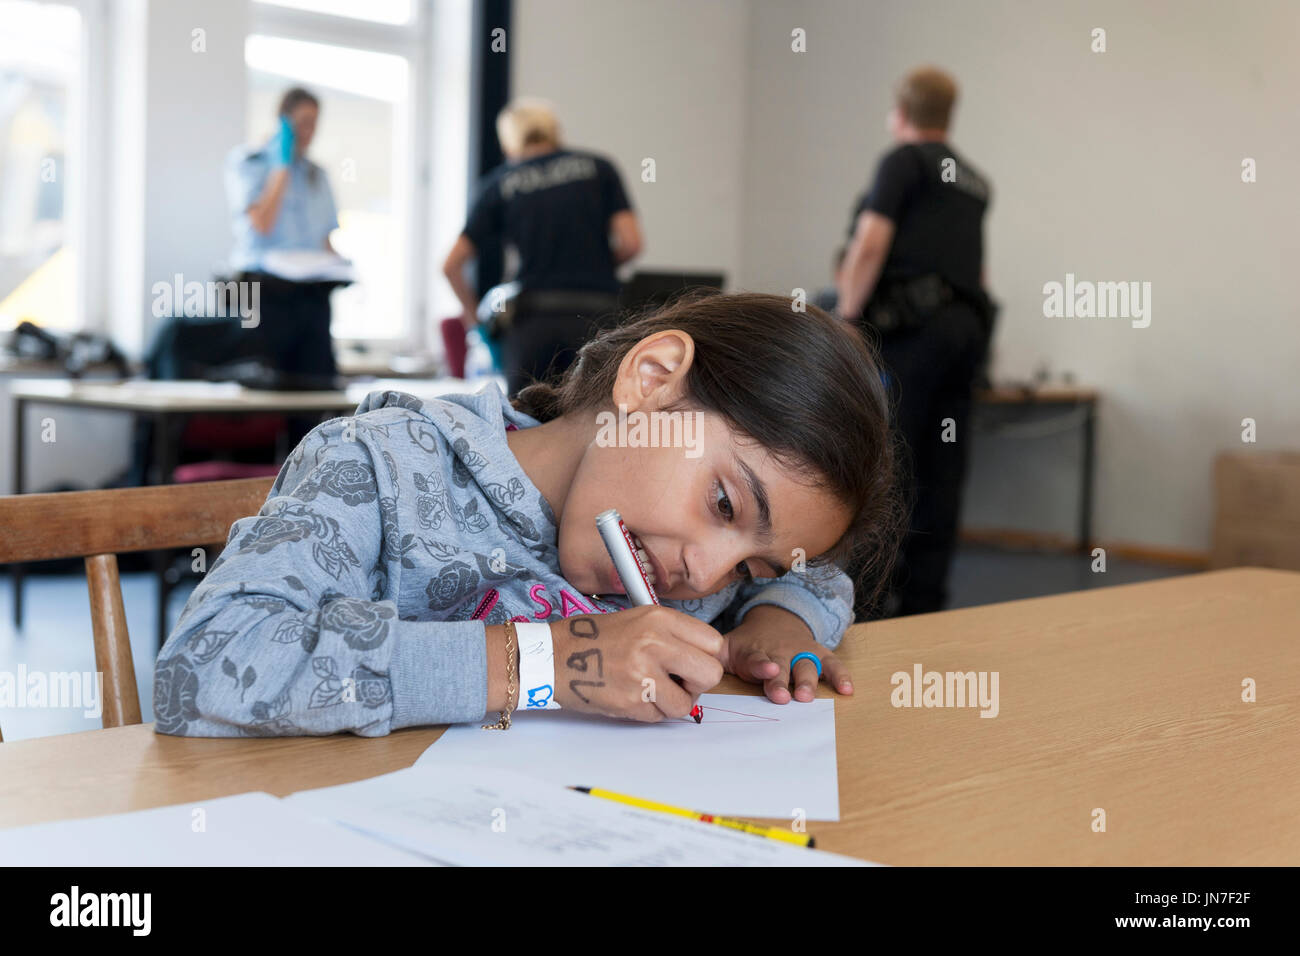 Passau, Germany - August 2, 2015 : Young refugee girl from Syria at the registration area in Passau, Bavaria. She is writing a letter. Stock Photo